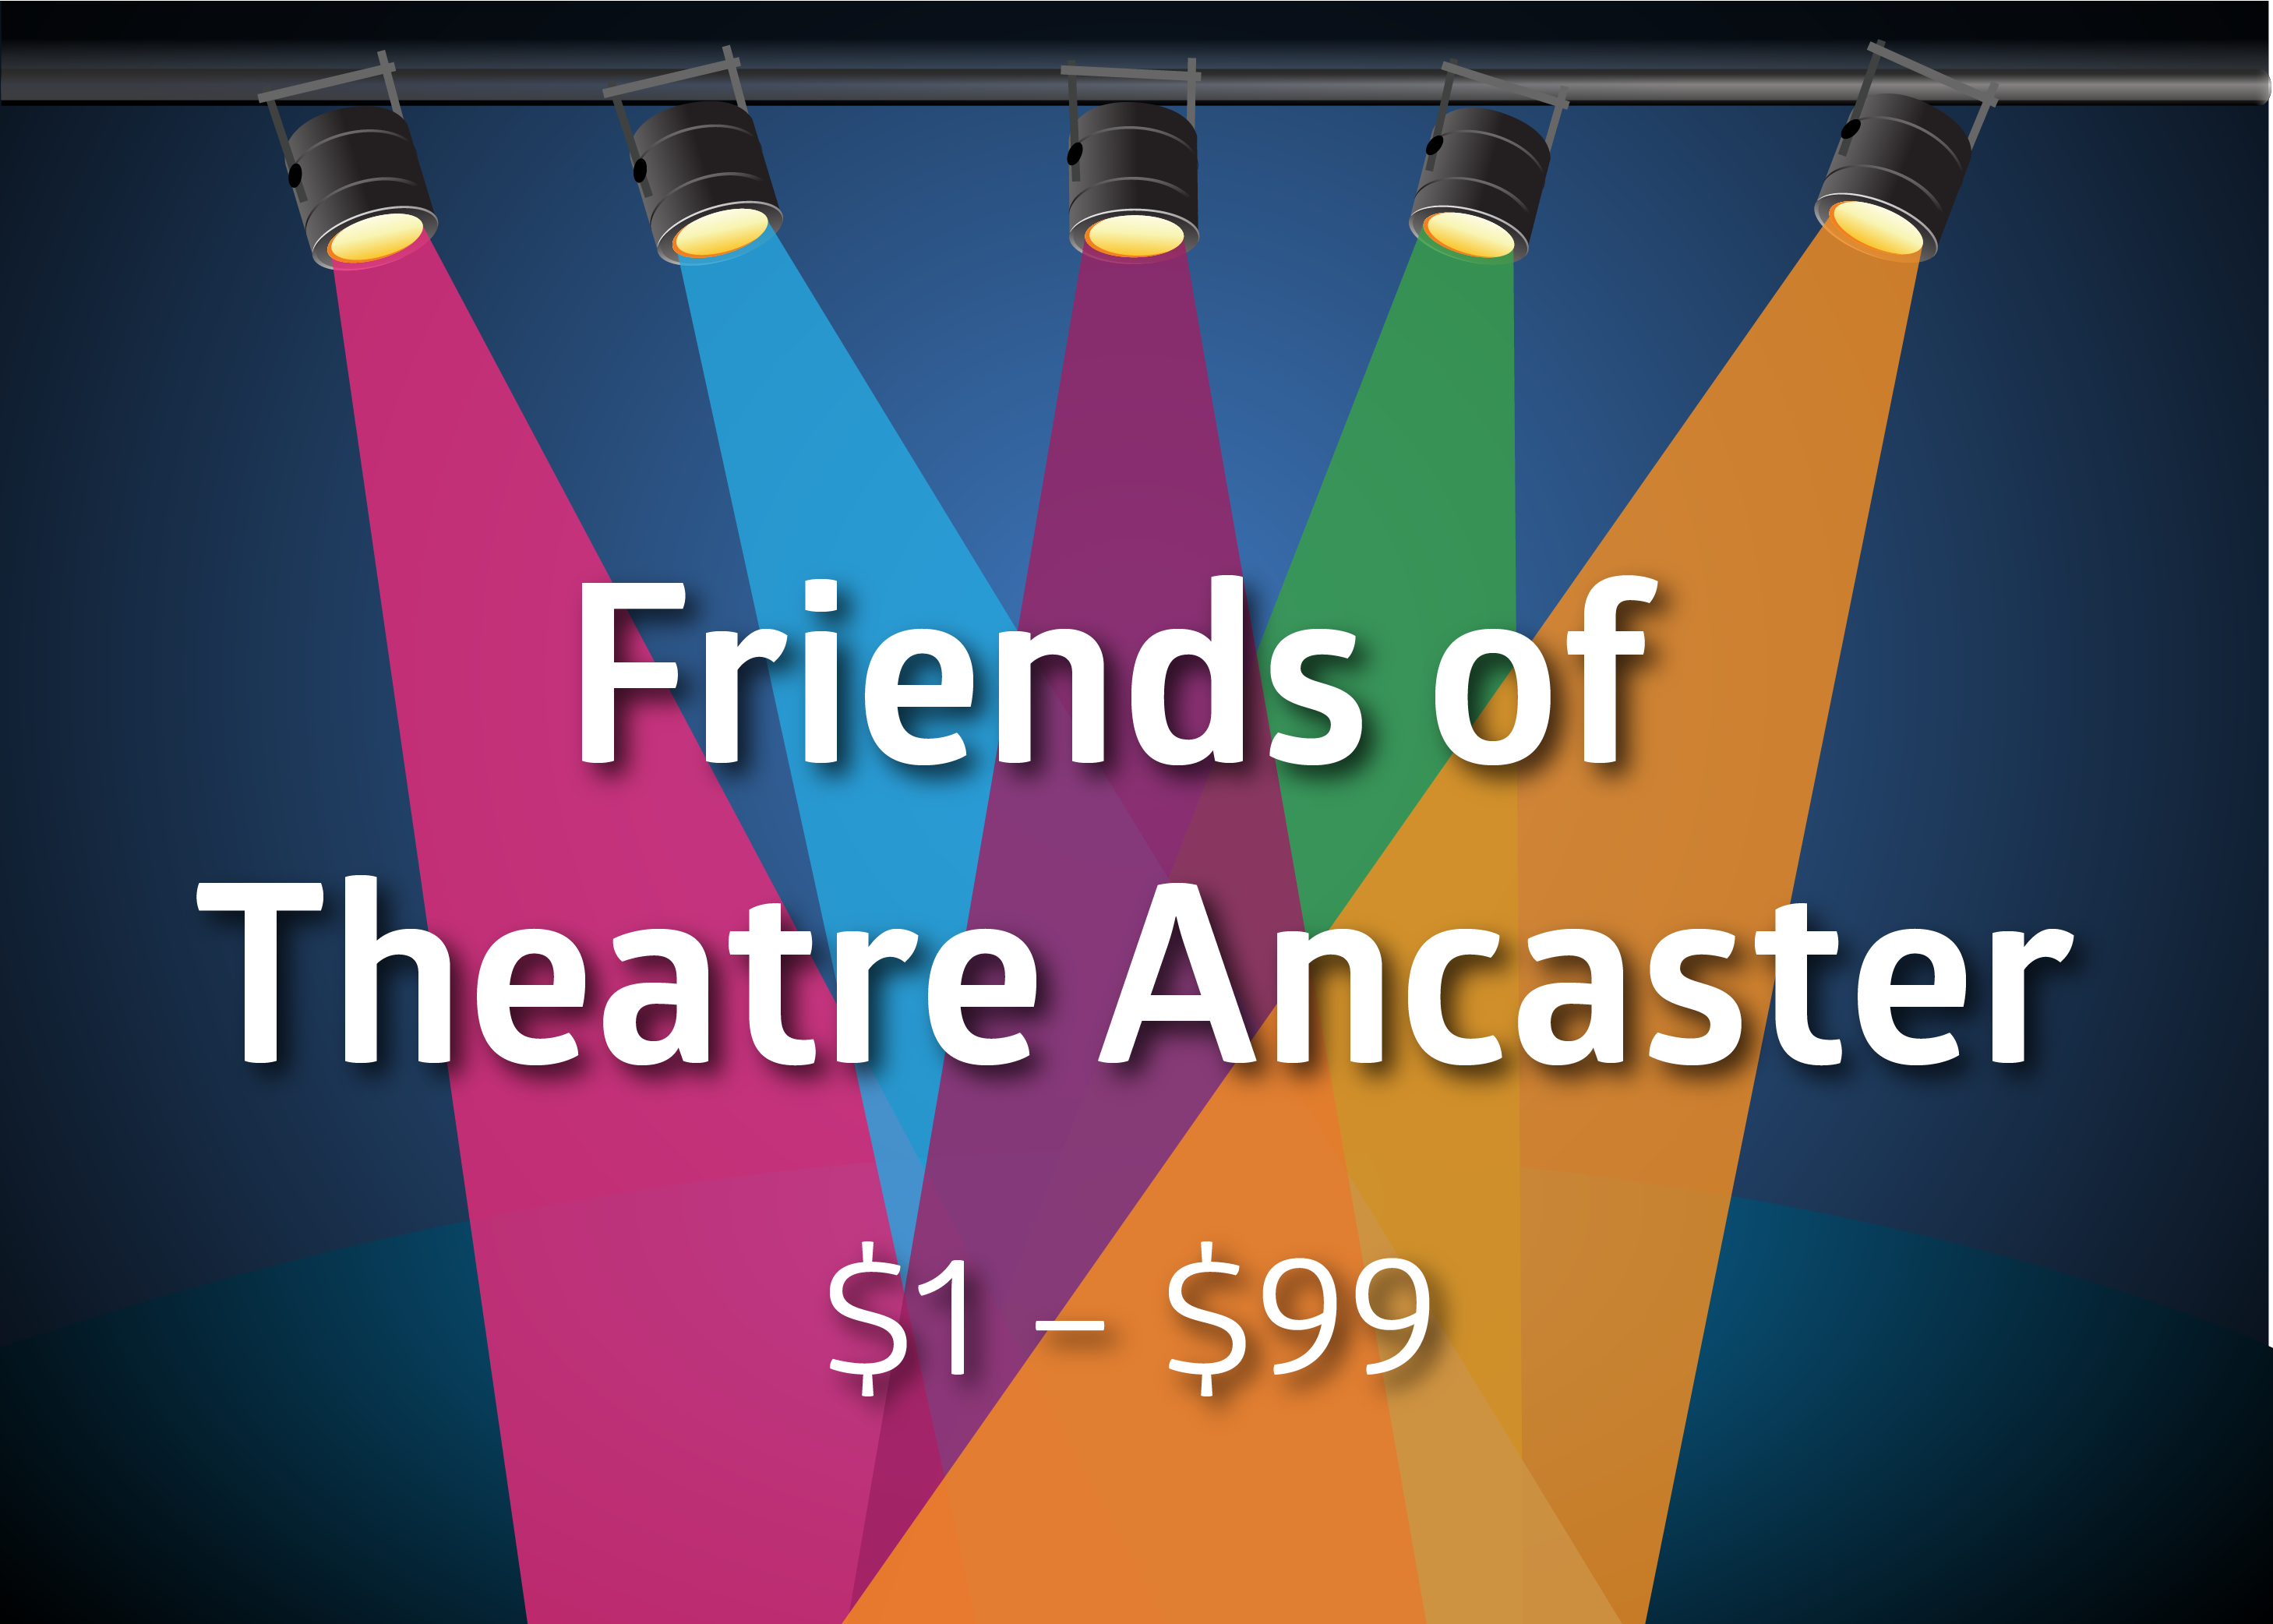 Friends of Theatre Ancaster